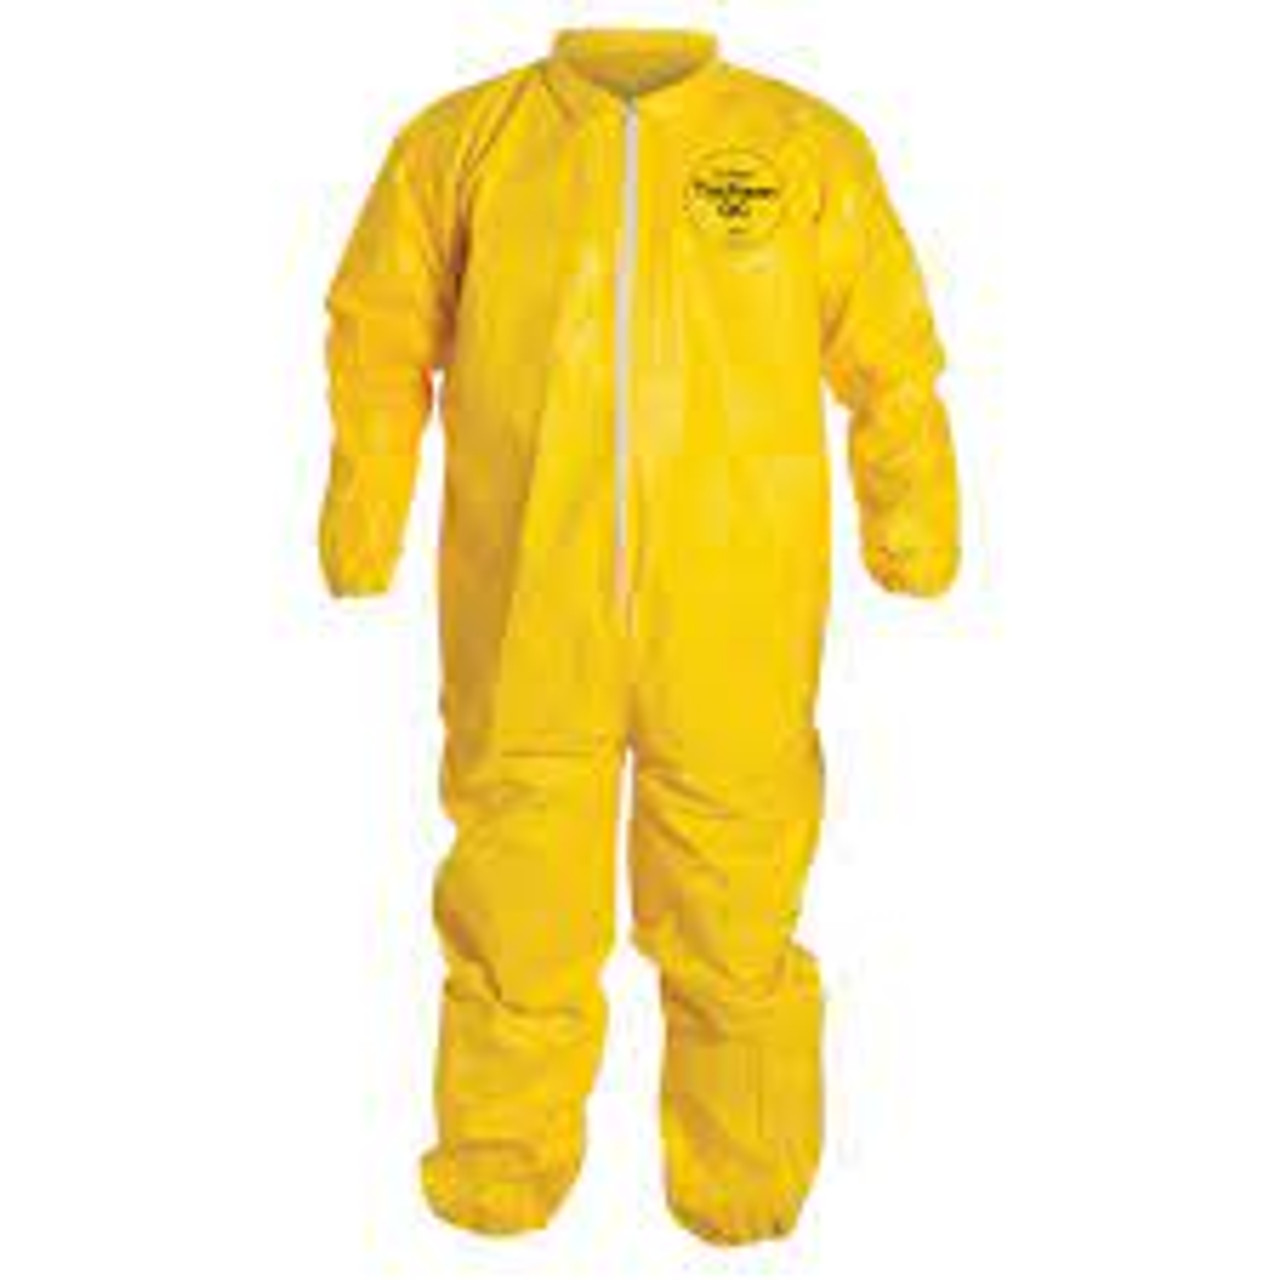 Combinaisons 2000 TychemMD, Taille Grand, Couleur Jaune QC125S-LG